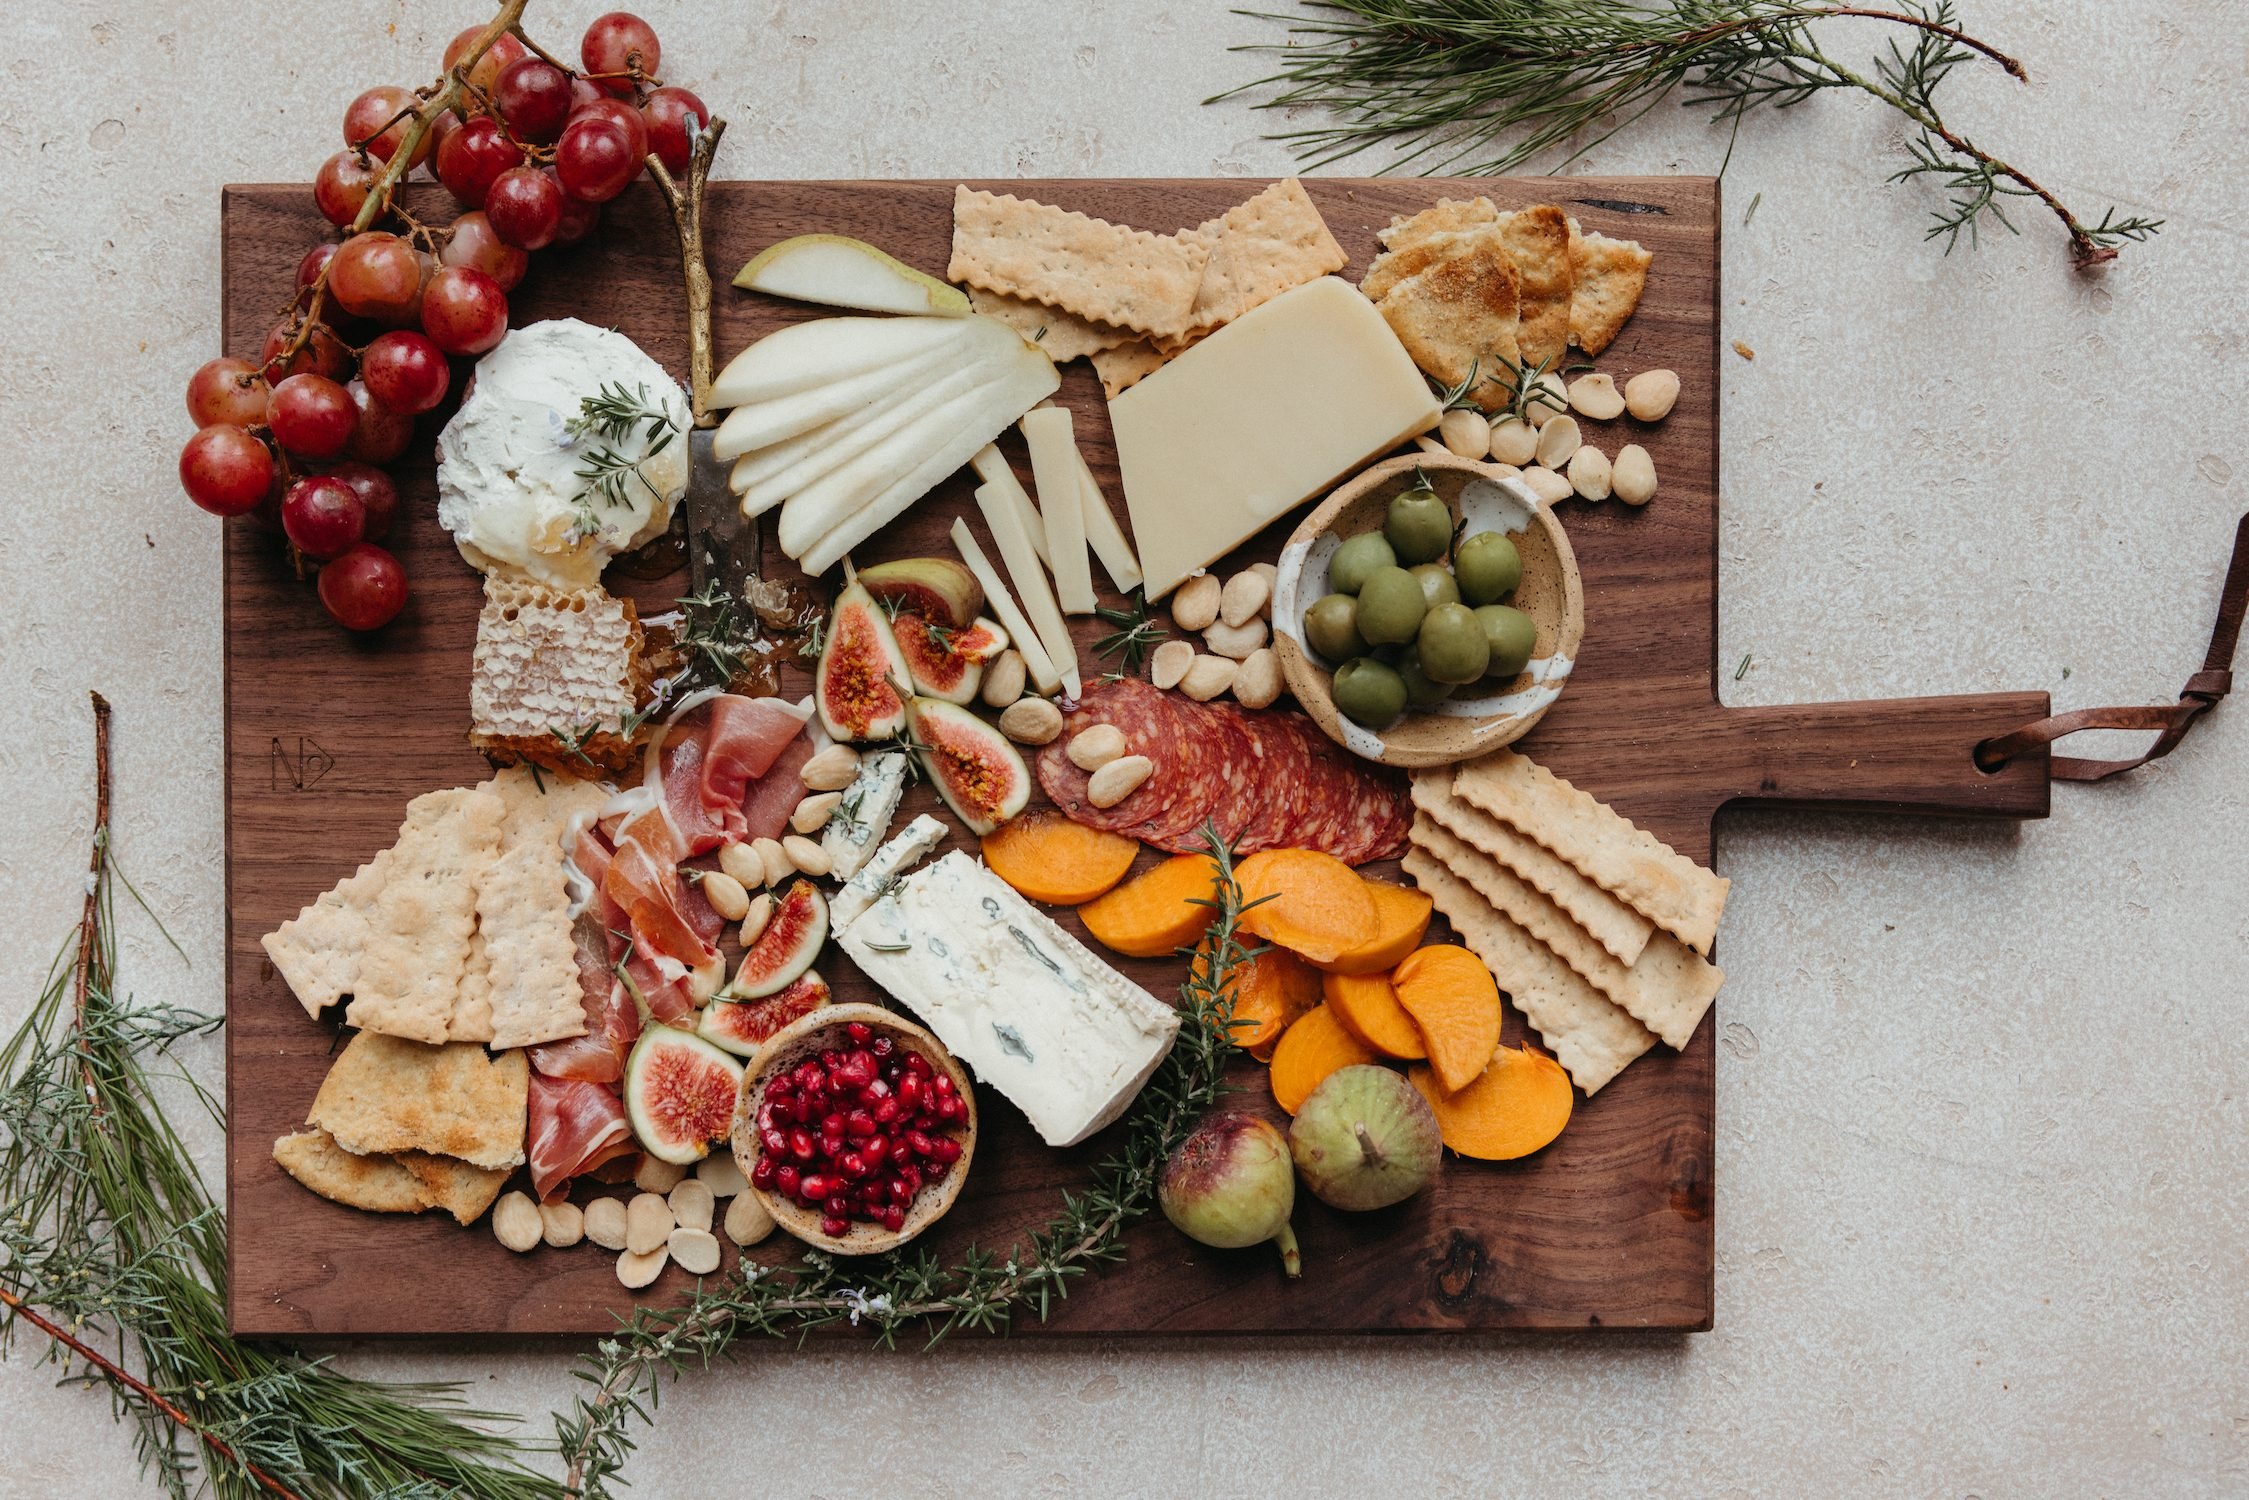 How to Make a Holiday Charcuterie Board—A Beginner’s Guide